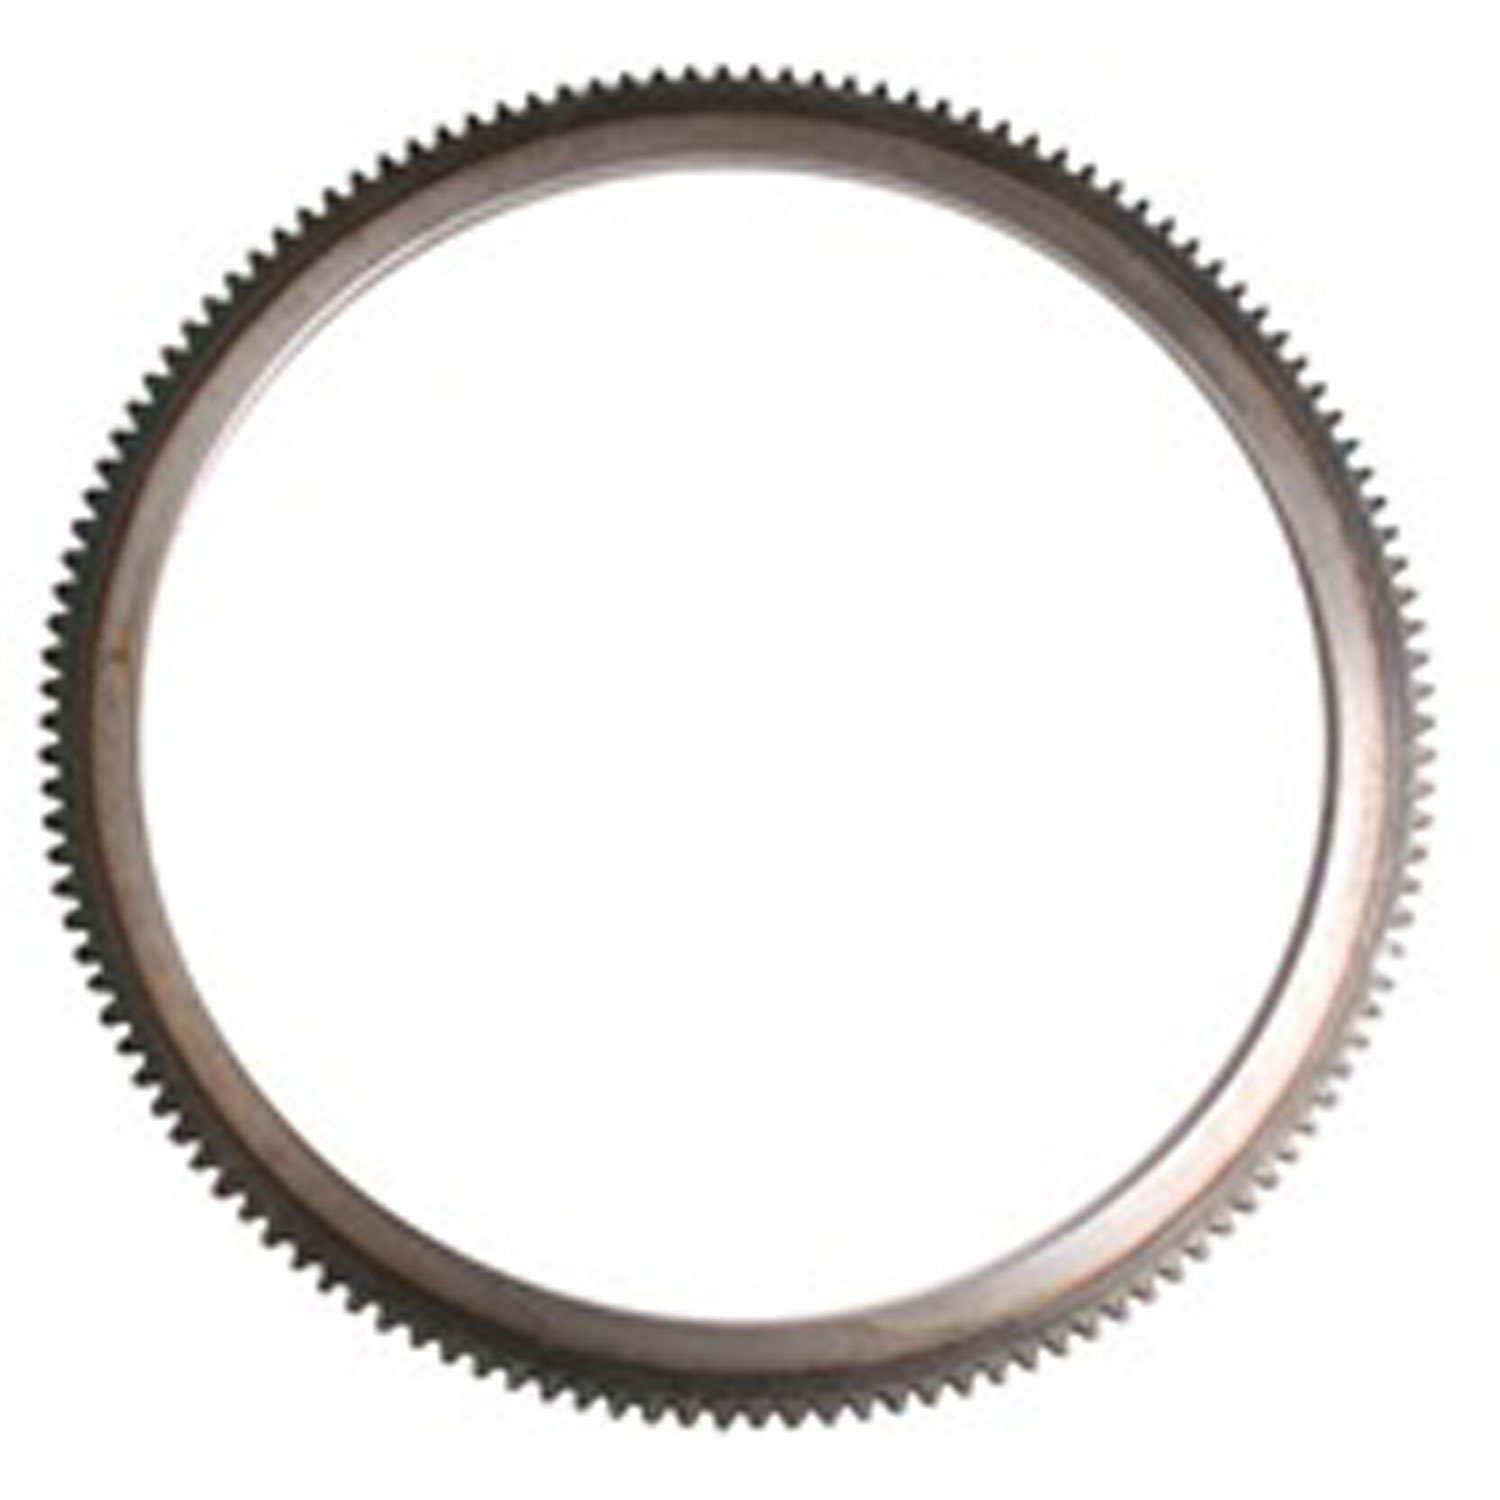 Replacement flywheel ring gear from Omix-ADA, Fits 53-71 Willys and Jeep models with 134 cub